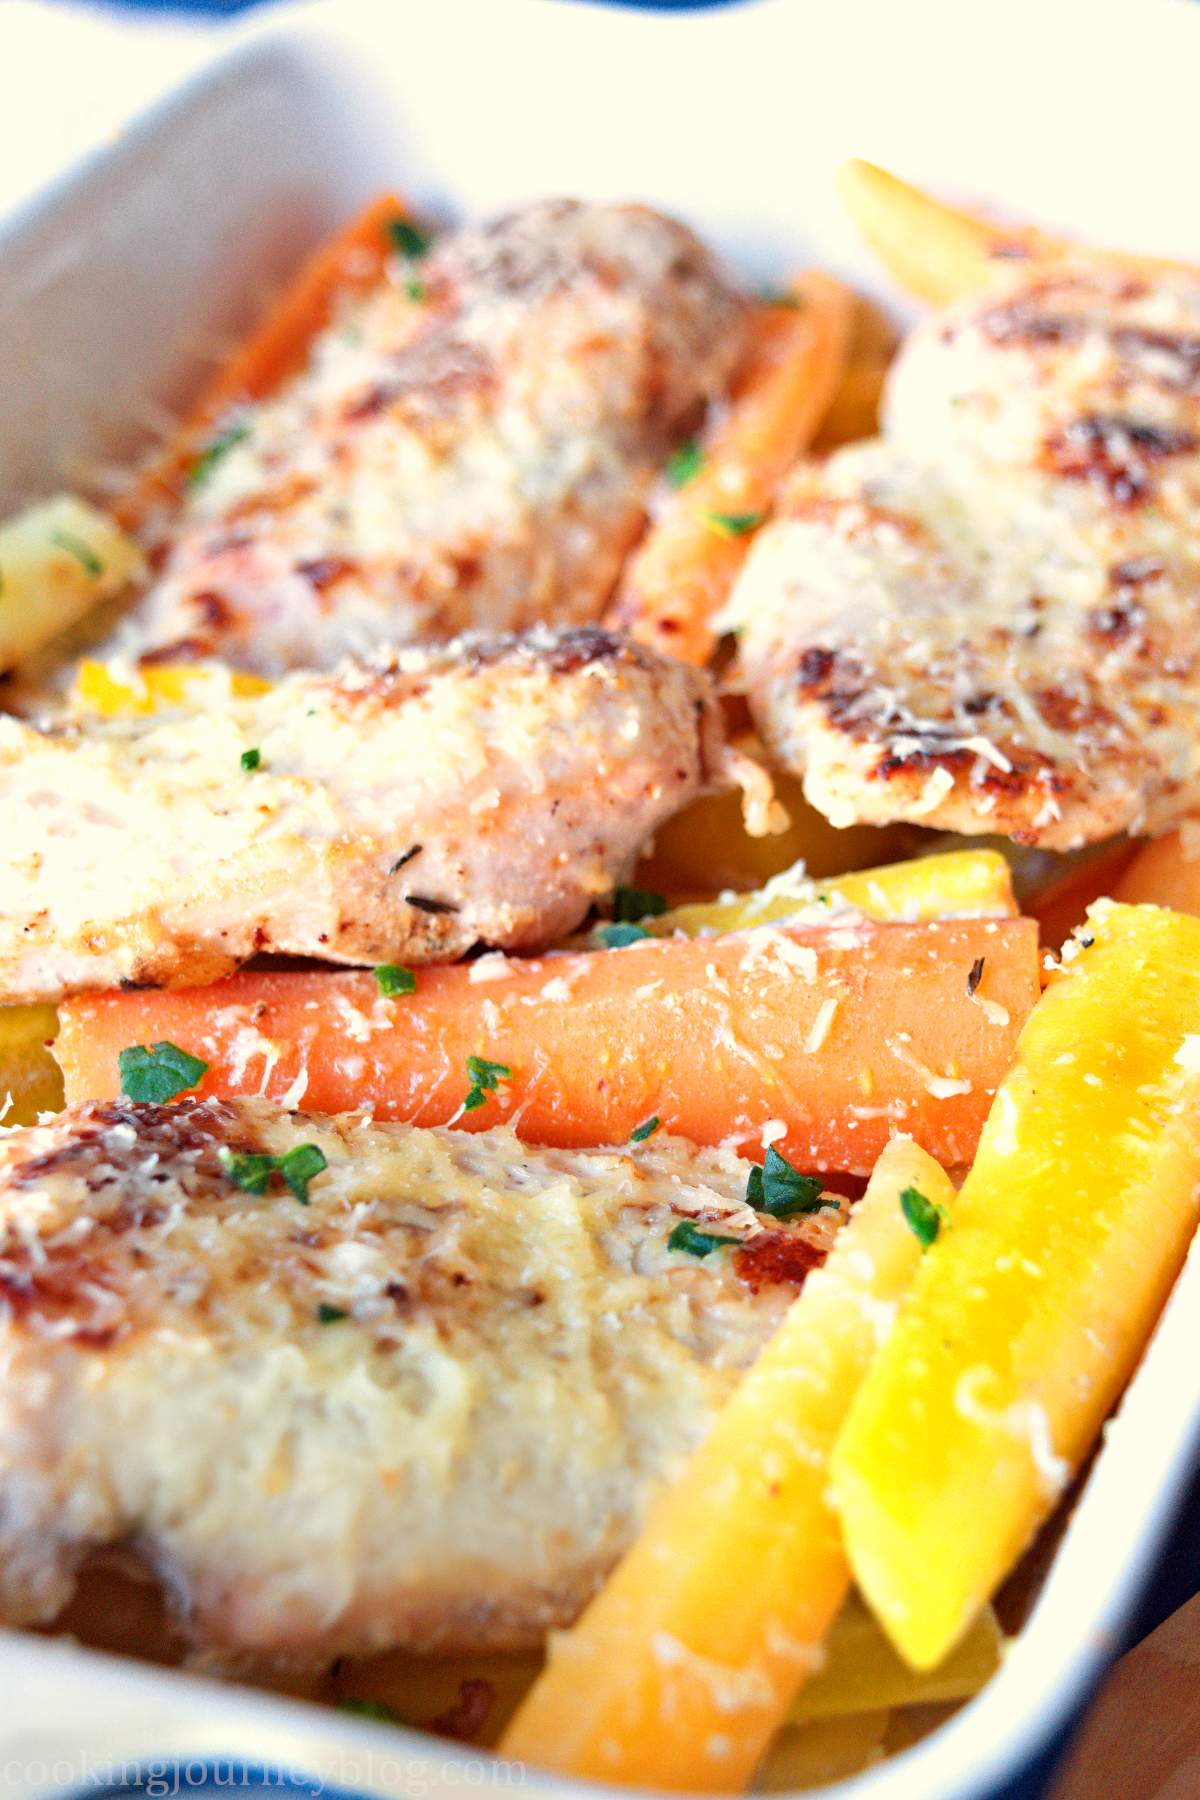 Baked chicken breasts and roasted baby carrots in a baking dish, served on a blue table